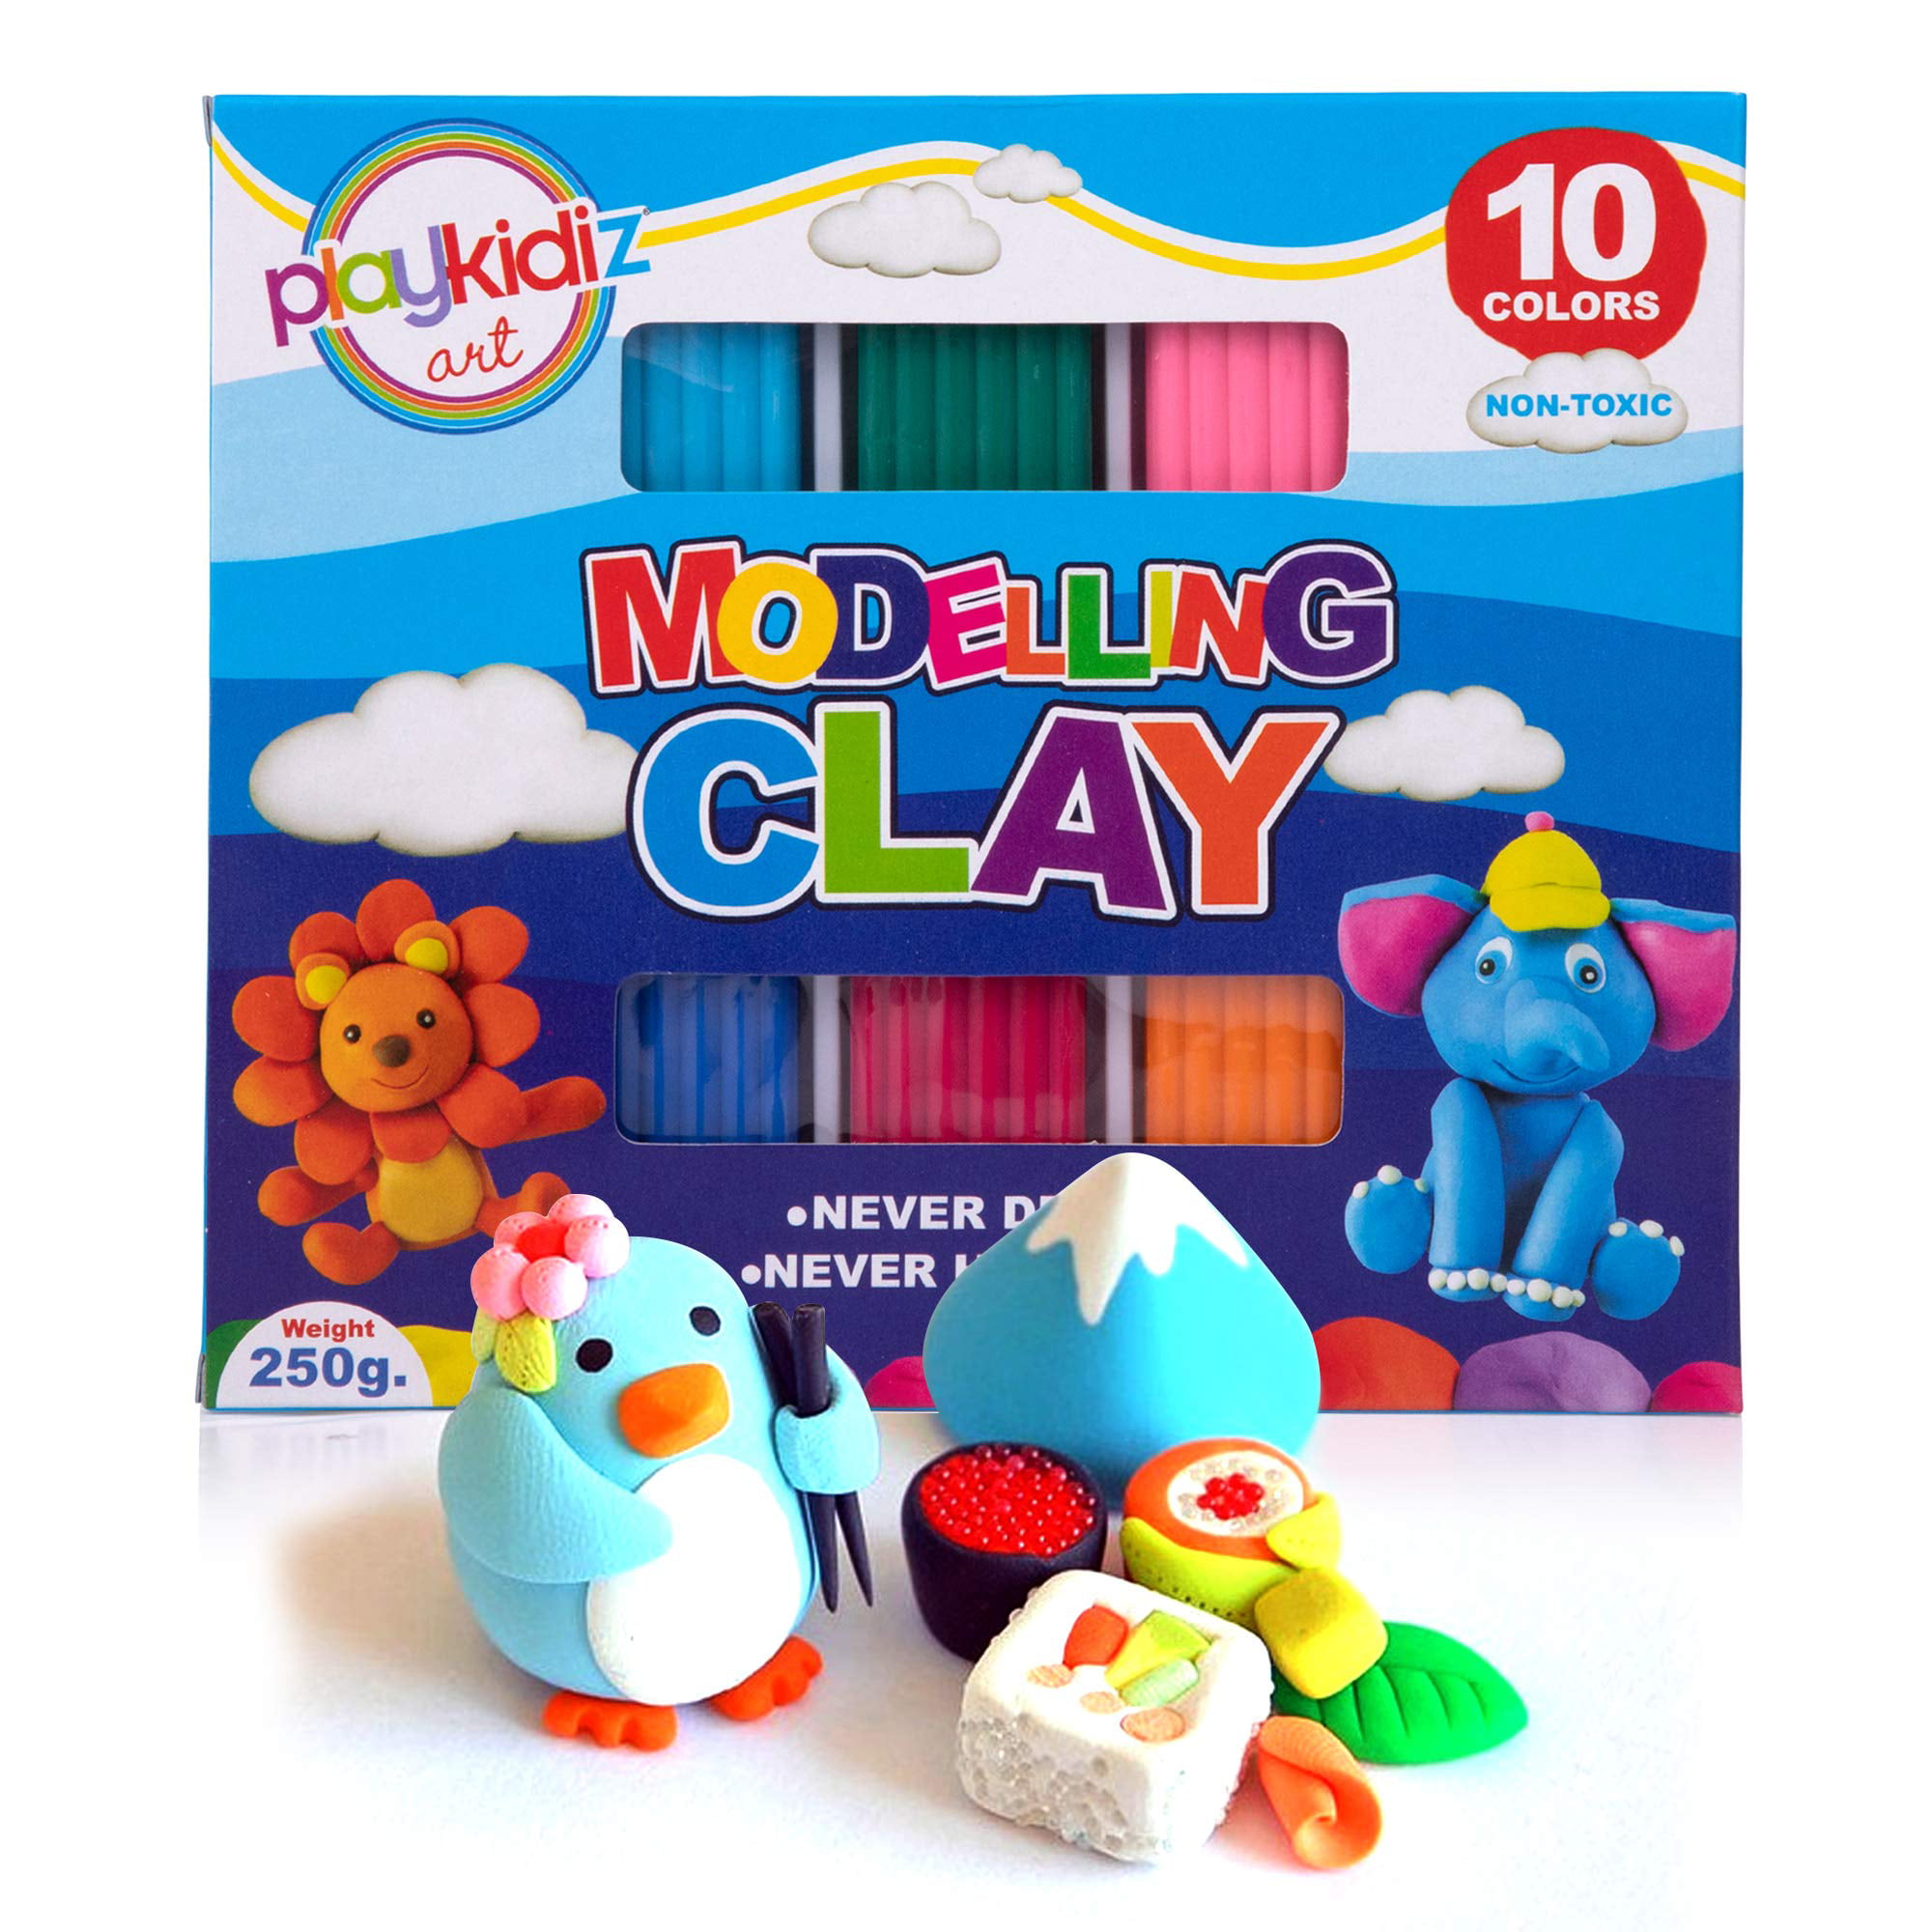 Arta and Crafts Modeling Clay for Kids 12 Colors Sticks Non-Toxic 3.5